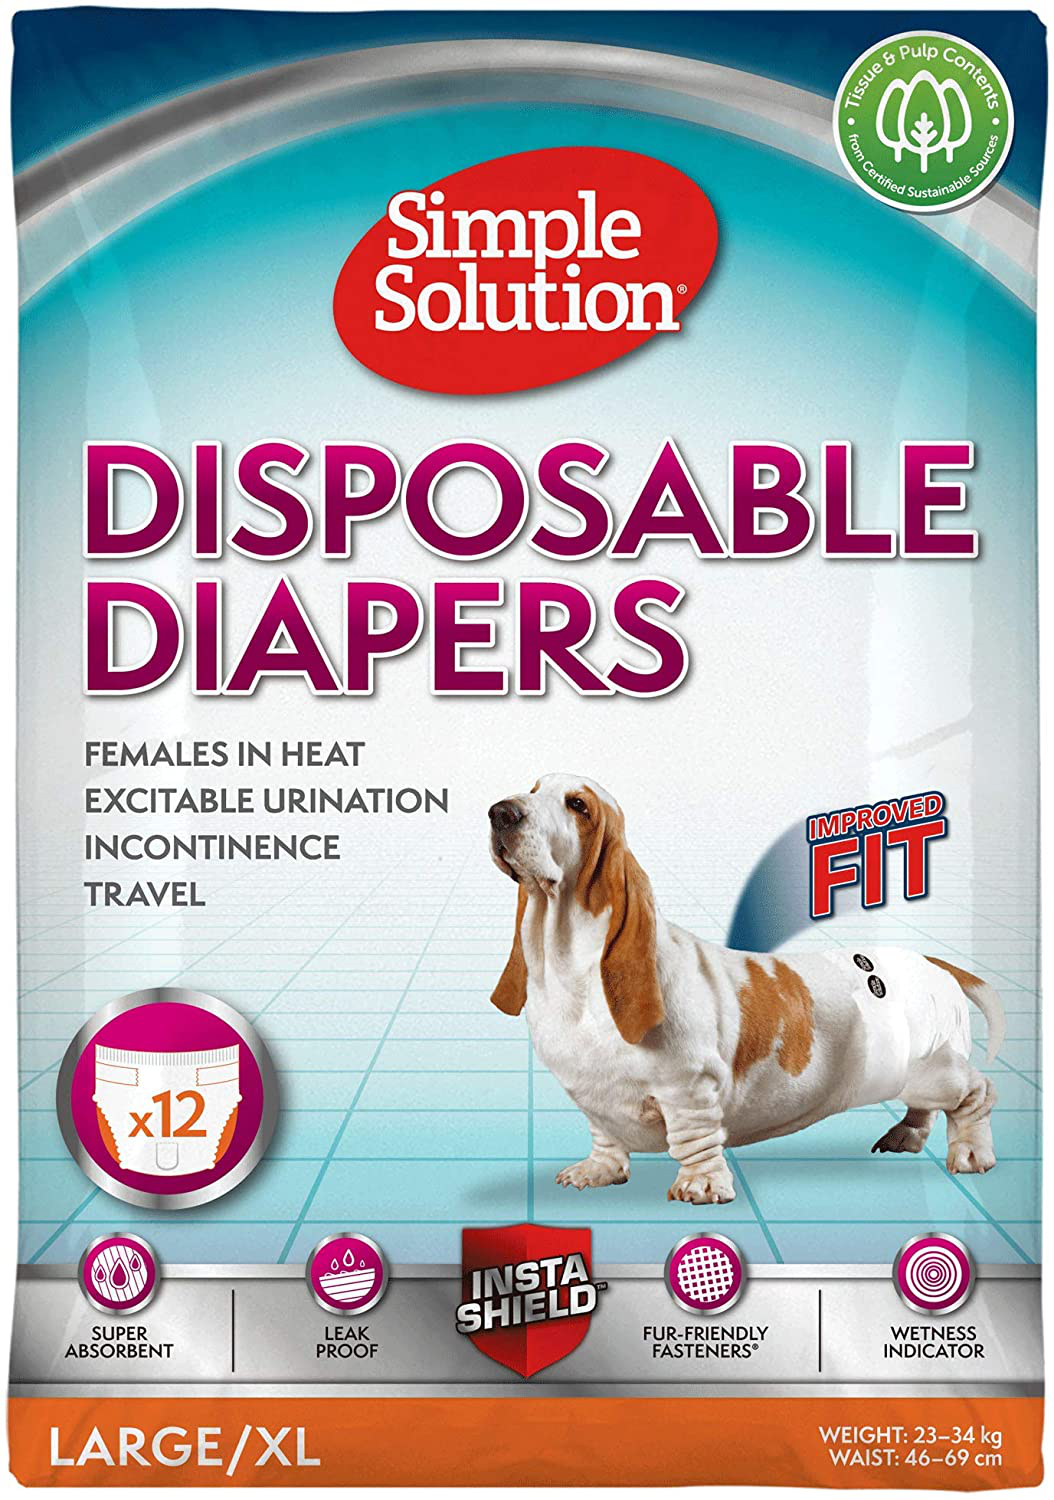 Simple Solution Disposable Dog Diapers for Female Dogs | Super Absorbent Leak-Proof Fit